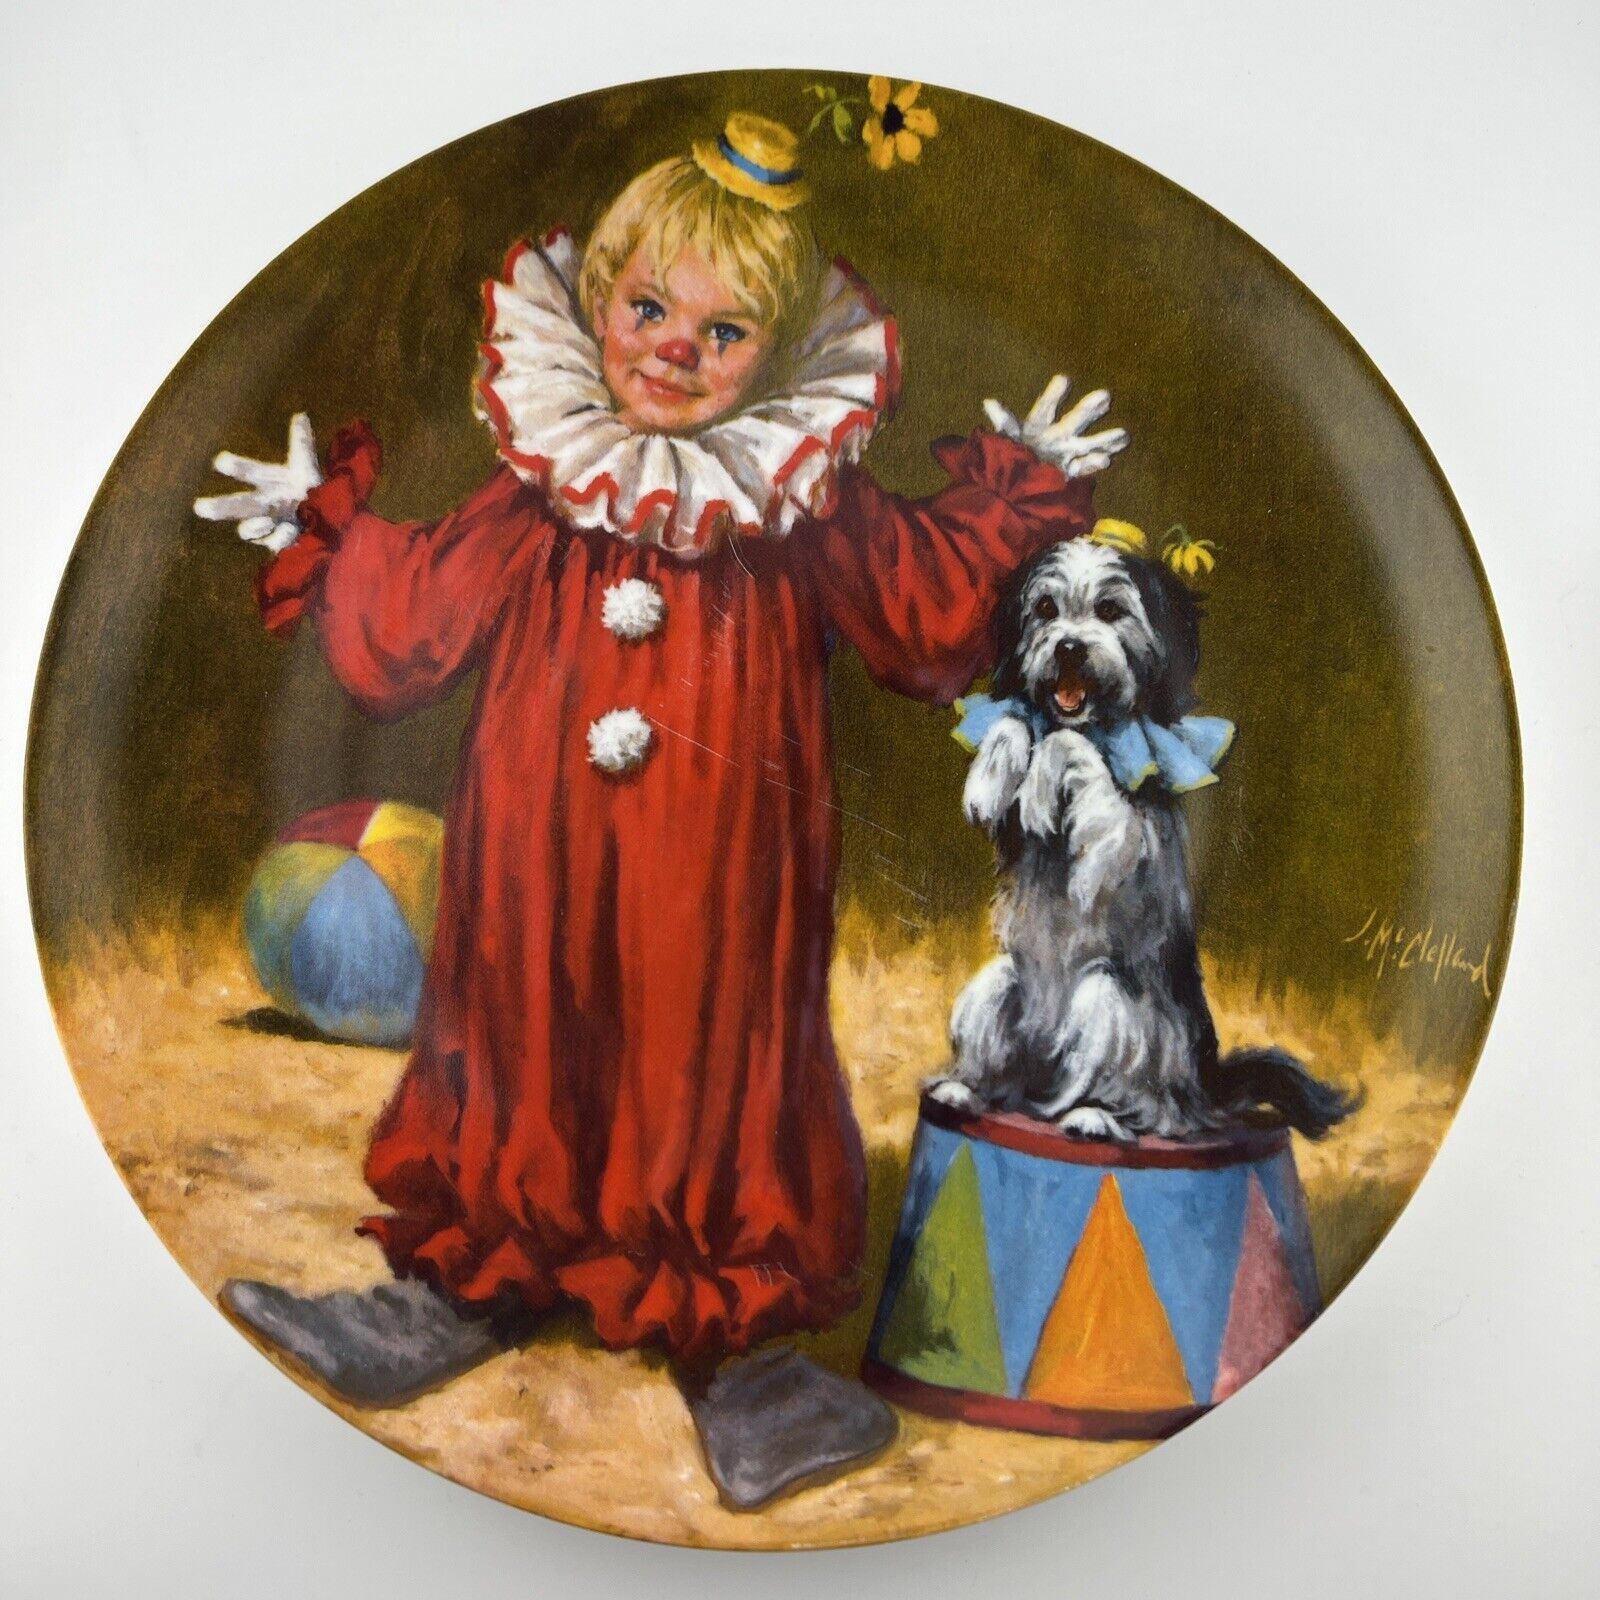 Vintage ReCo “Tommy The Clown” by John McClelland, Collector Plate. Children's C